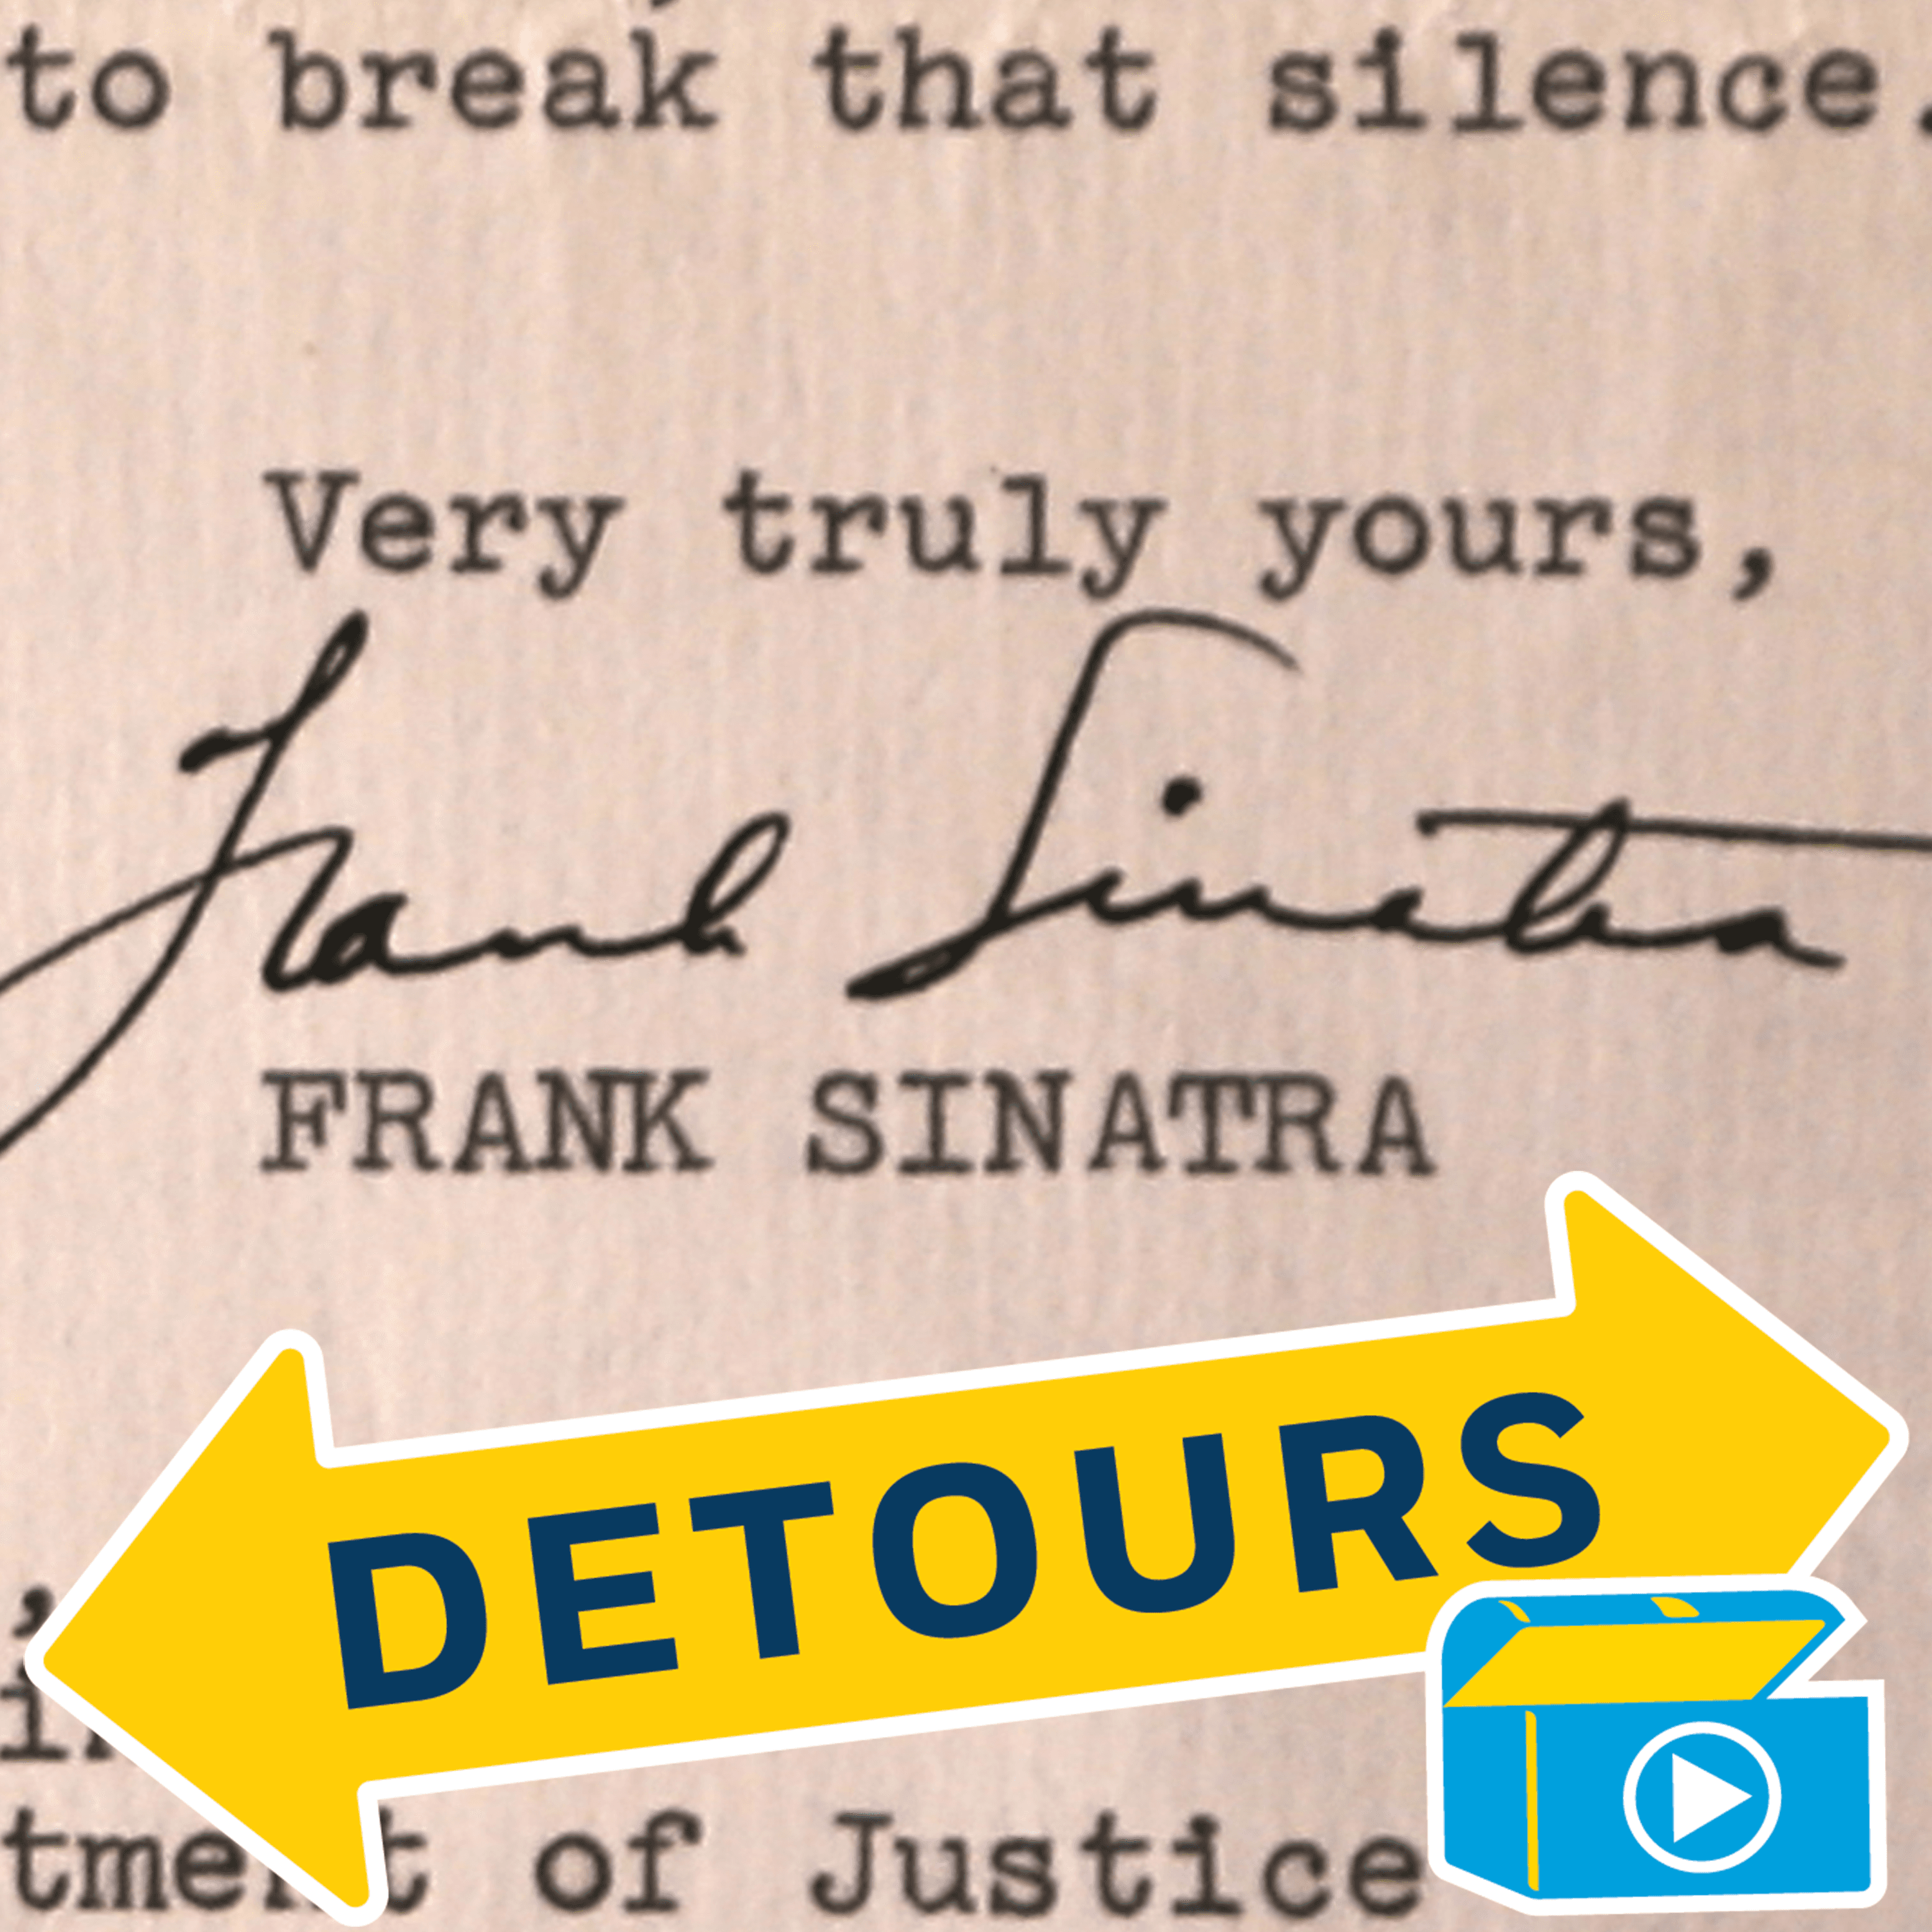 Thumbnail for "Very Truly Yours, Frank Sinatra".